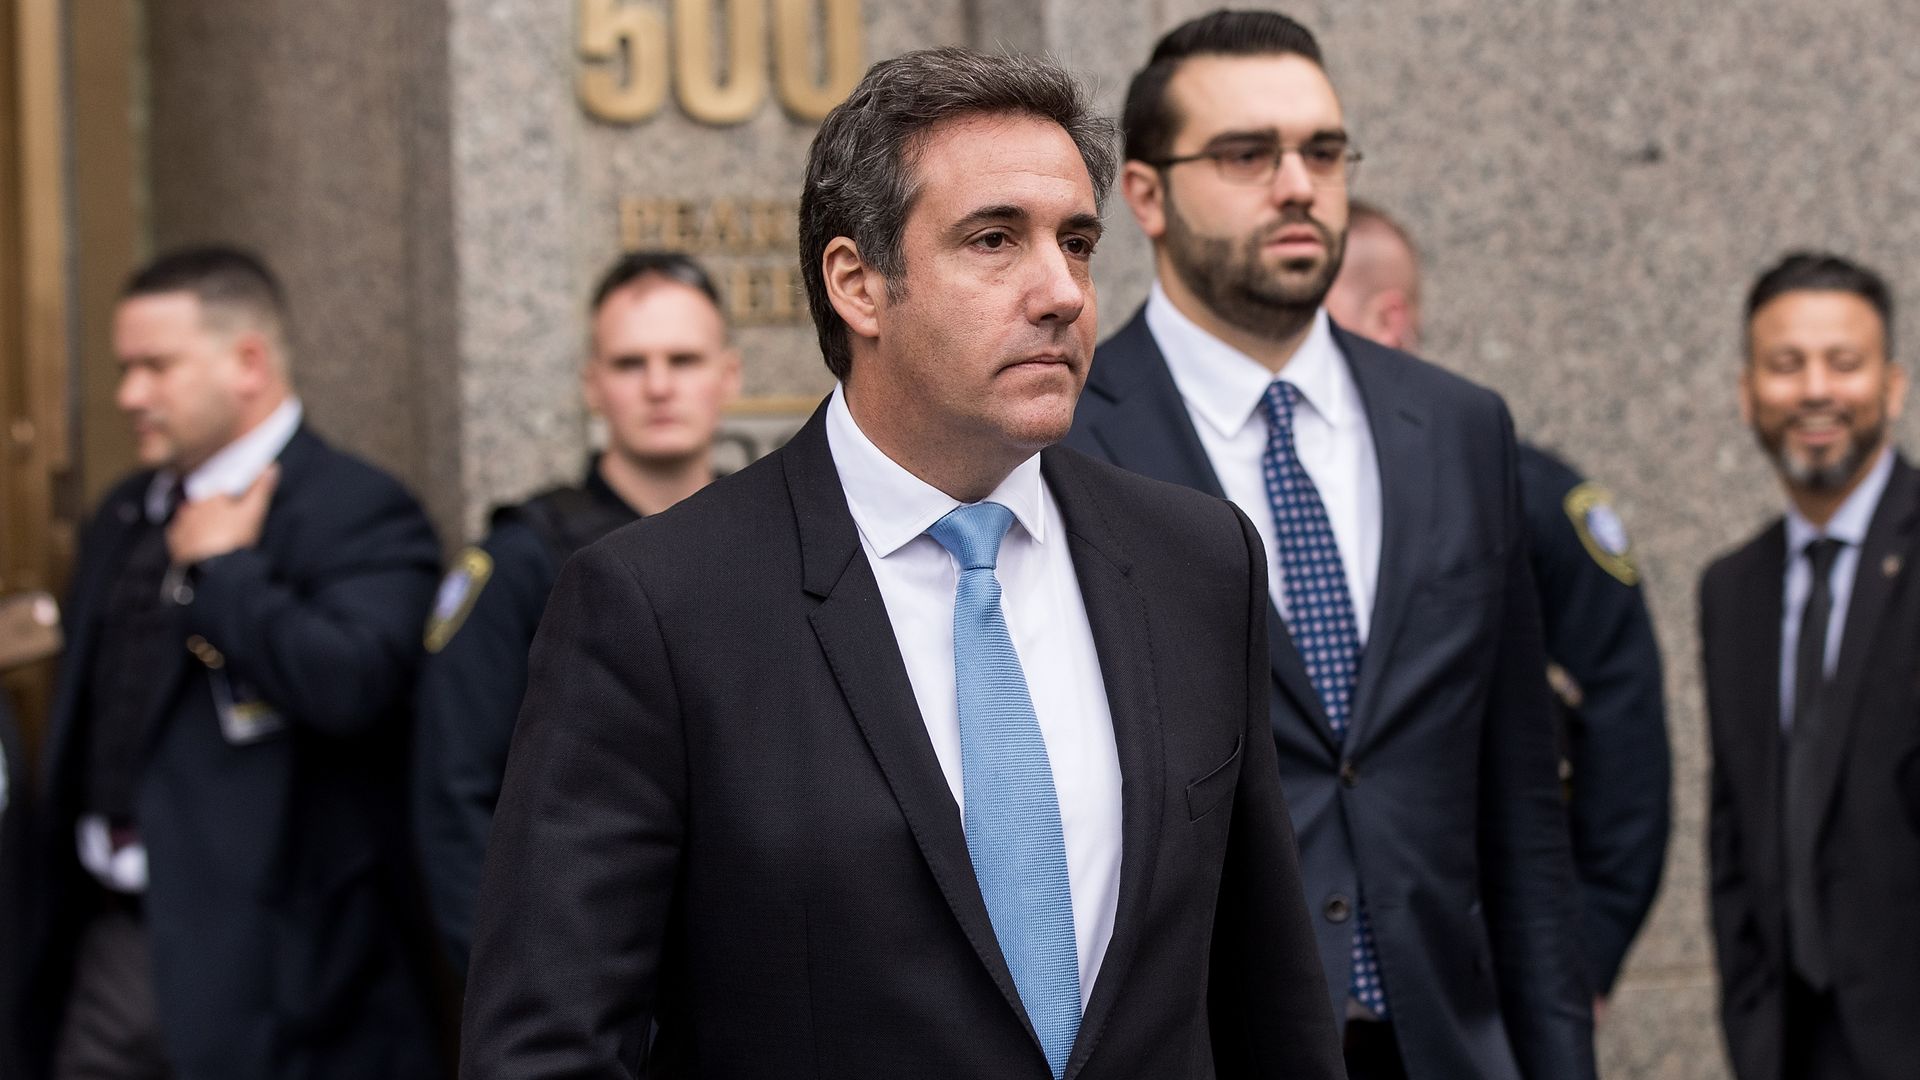 Michael Cohen, longtime personal lawyer for President Donald Trump, walks out of a building frowning